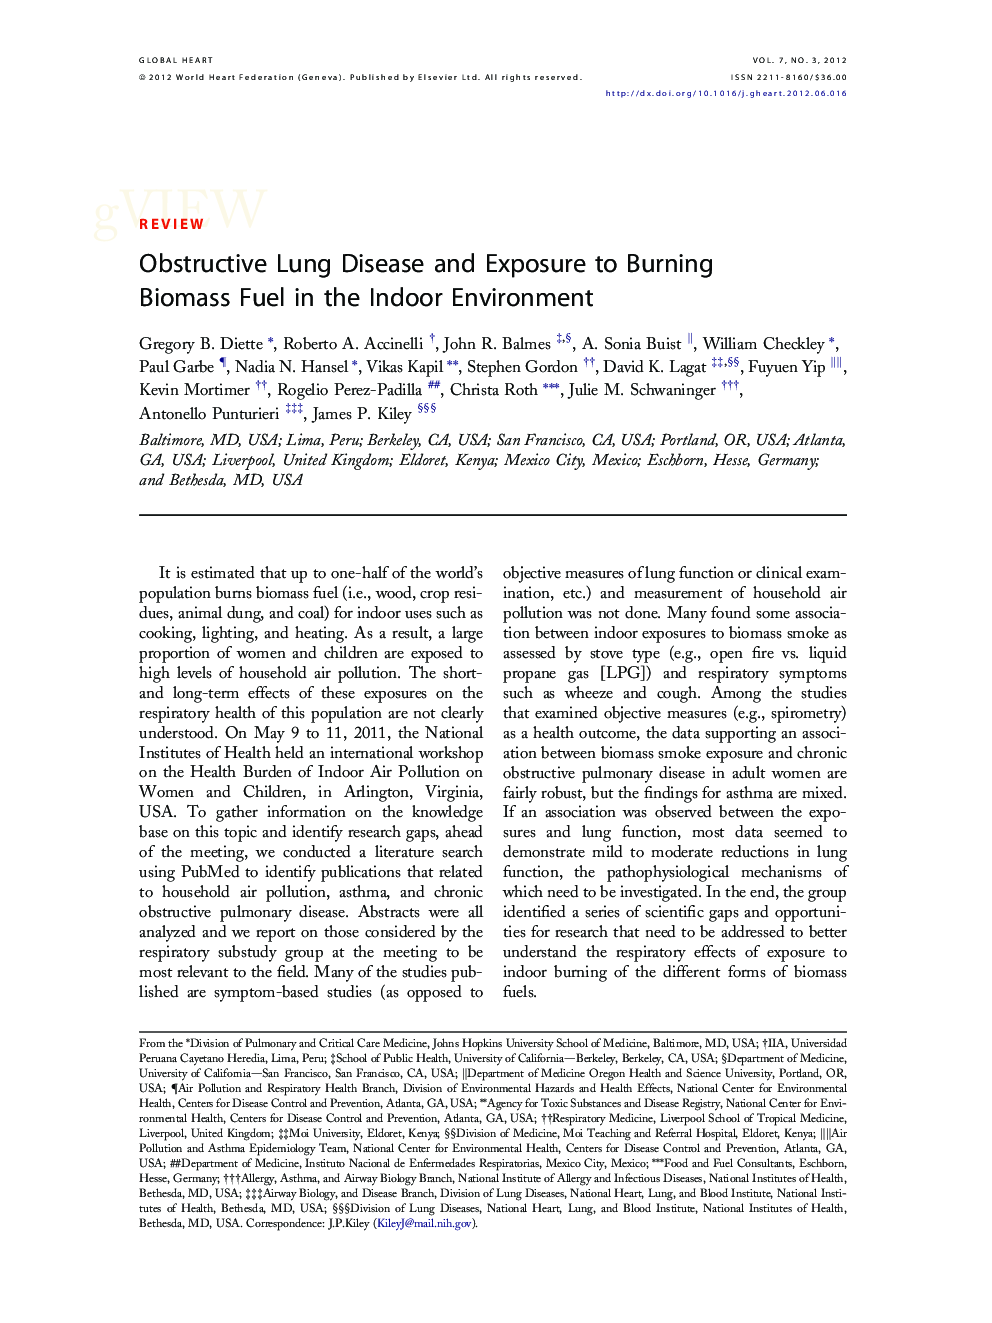 Obstructive Lung Disease and Exposure to Burning Biomass Fuel in the Indoor Environment